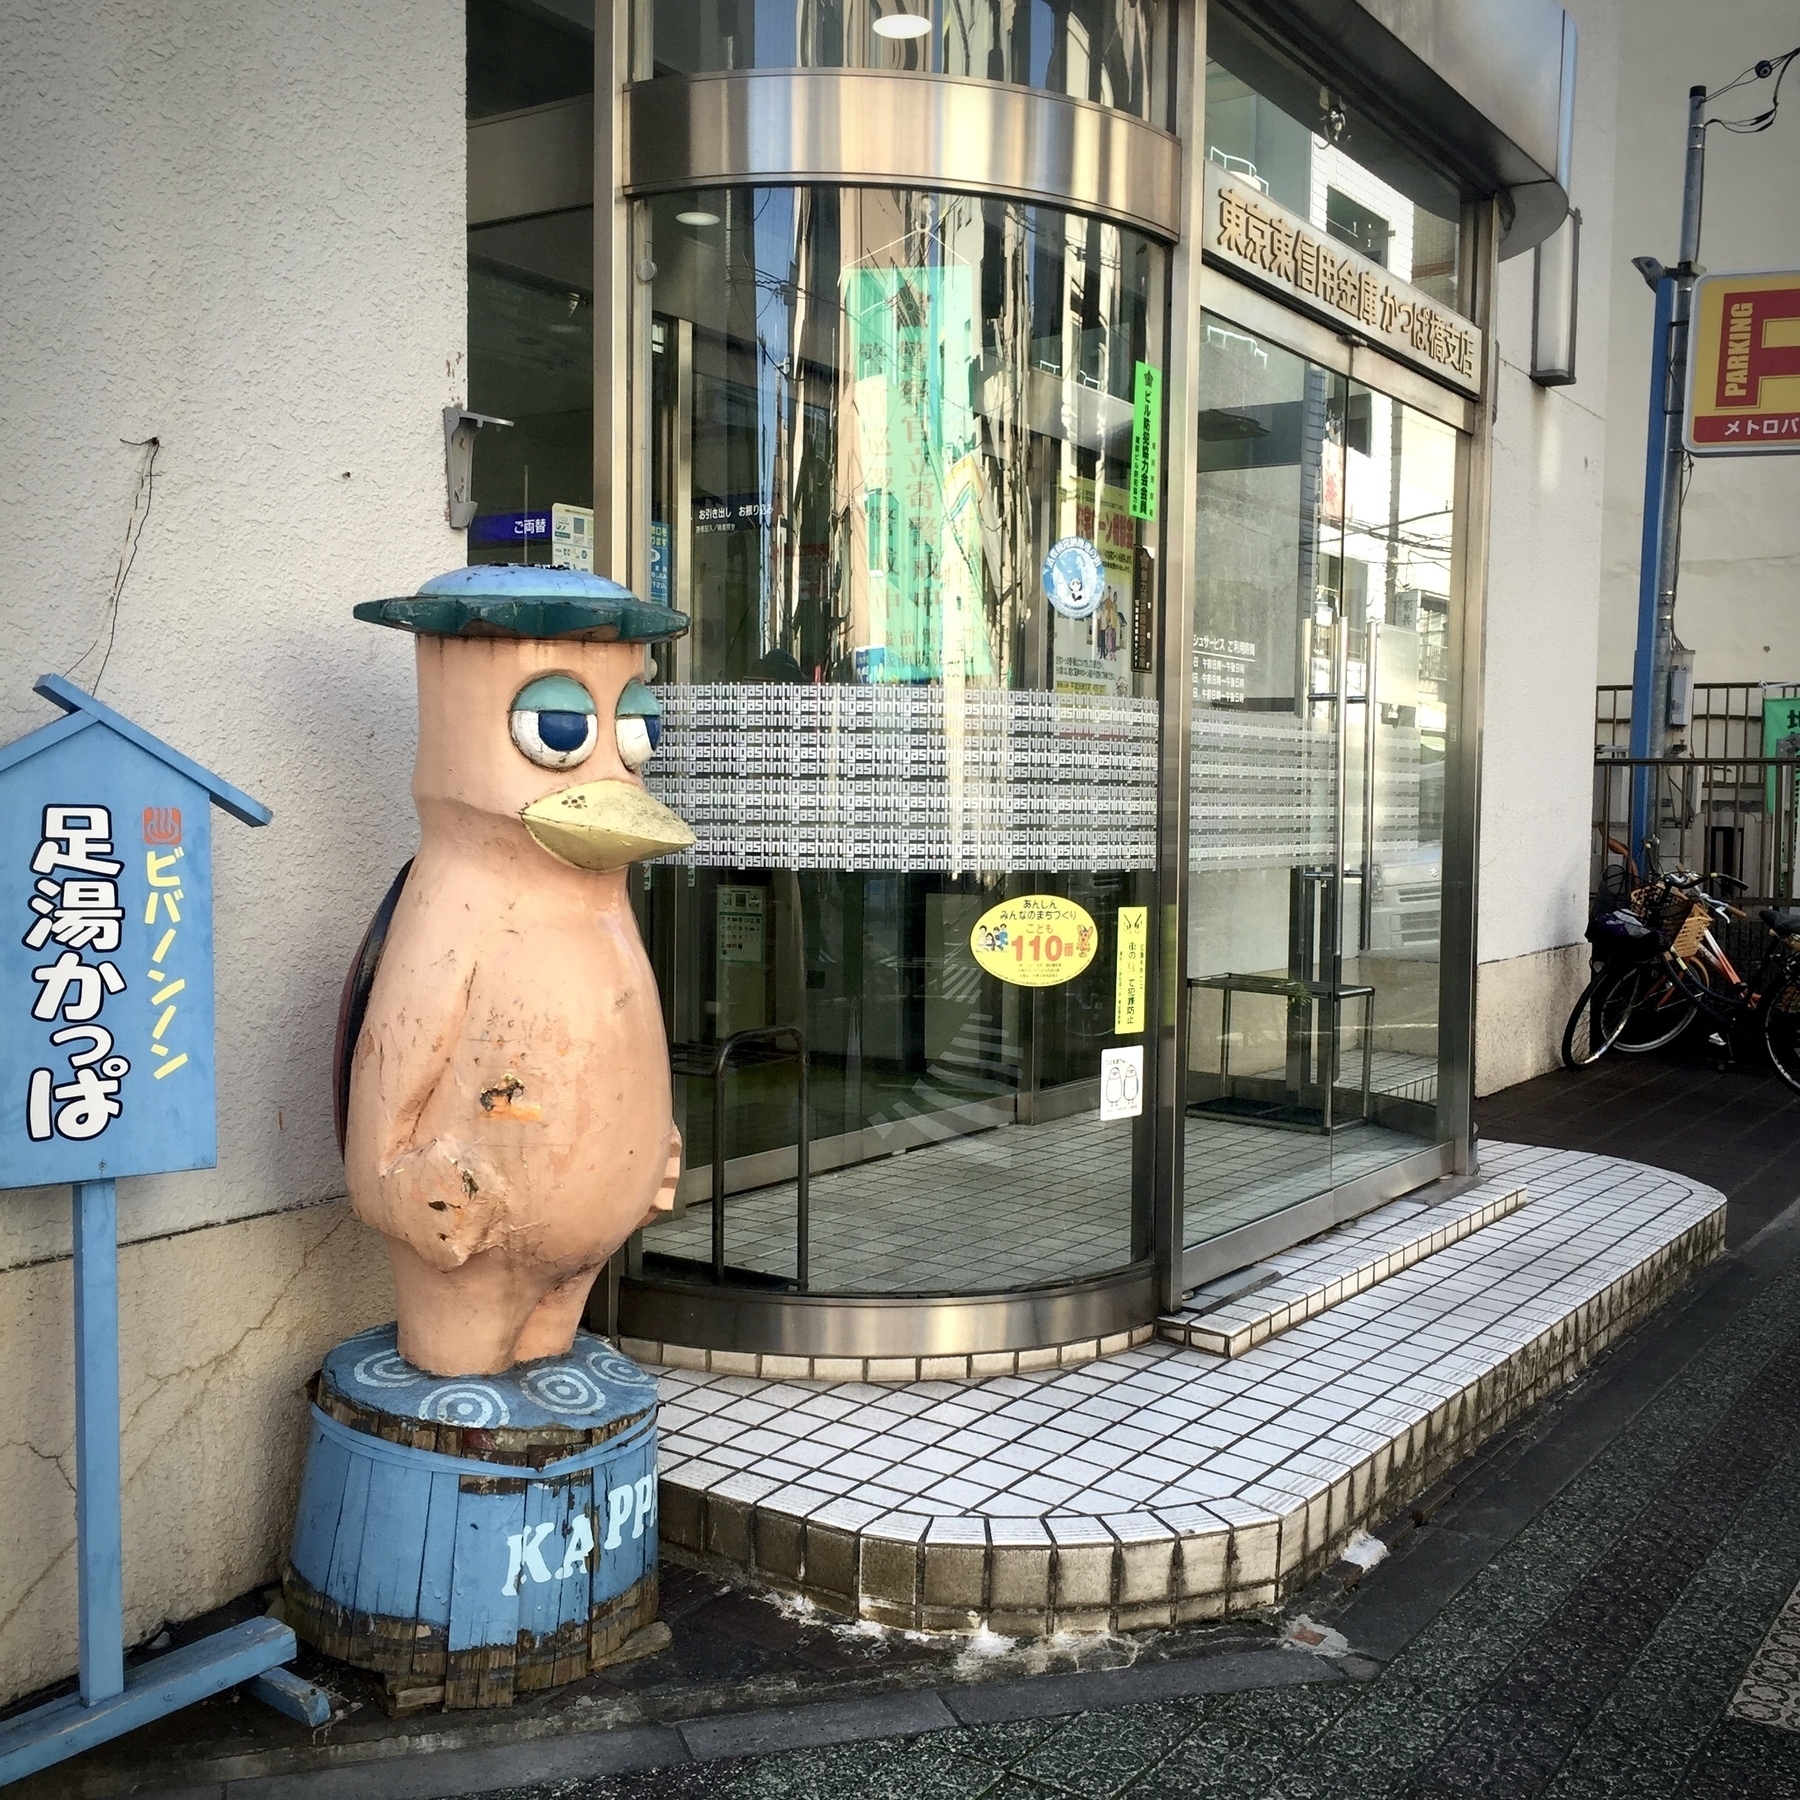 Kappa statue for a foot spa